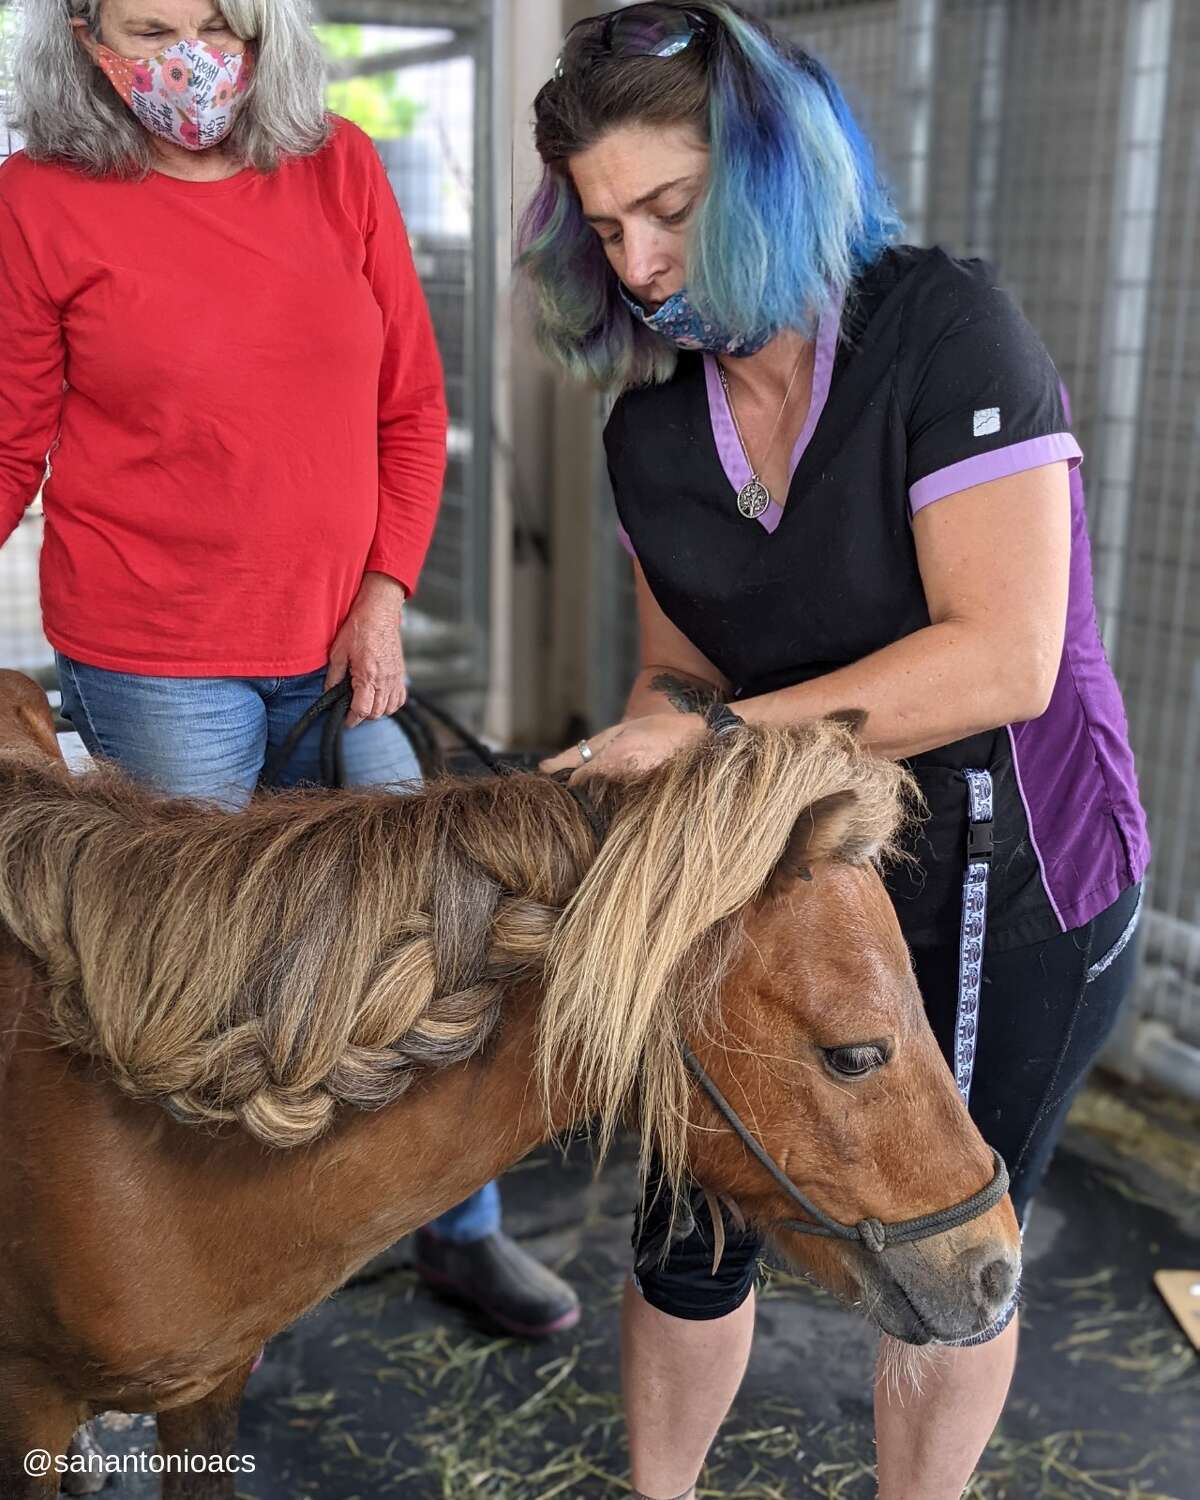 The Animal Care Services recently rescued a pony that looks like the precious Li'l Sebastian from the iconic television series "Parks and Recreation."  